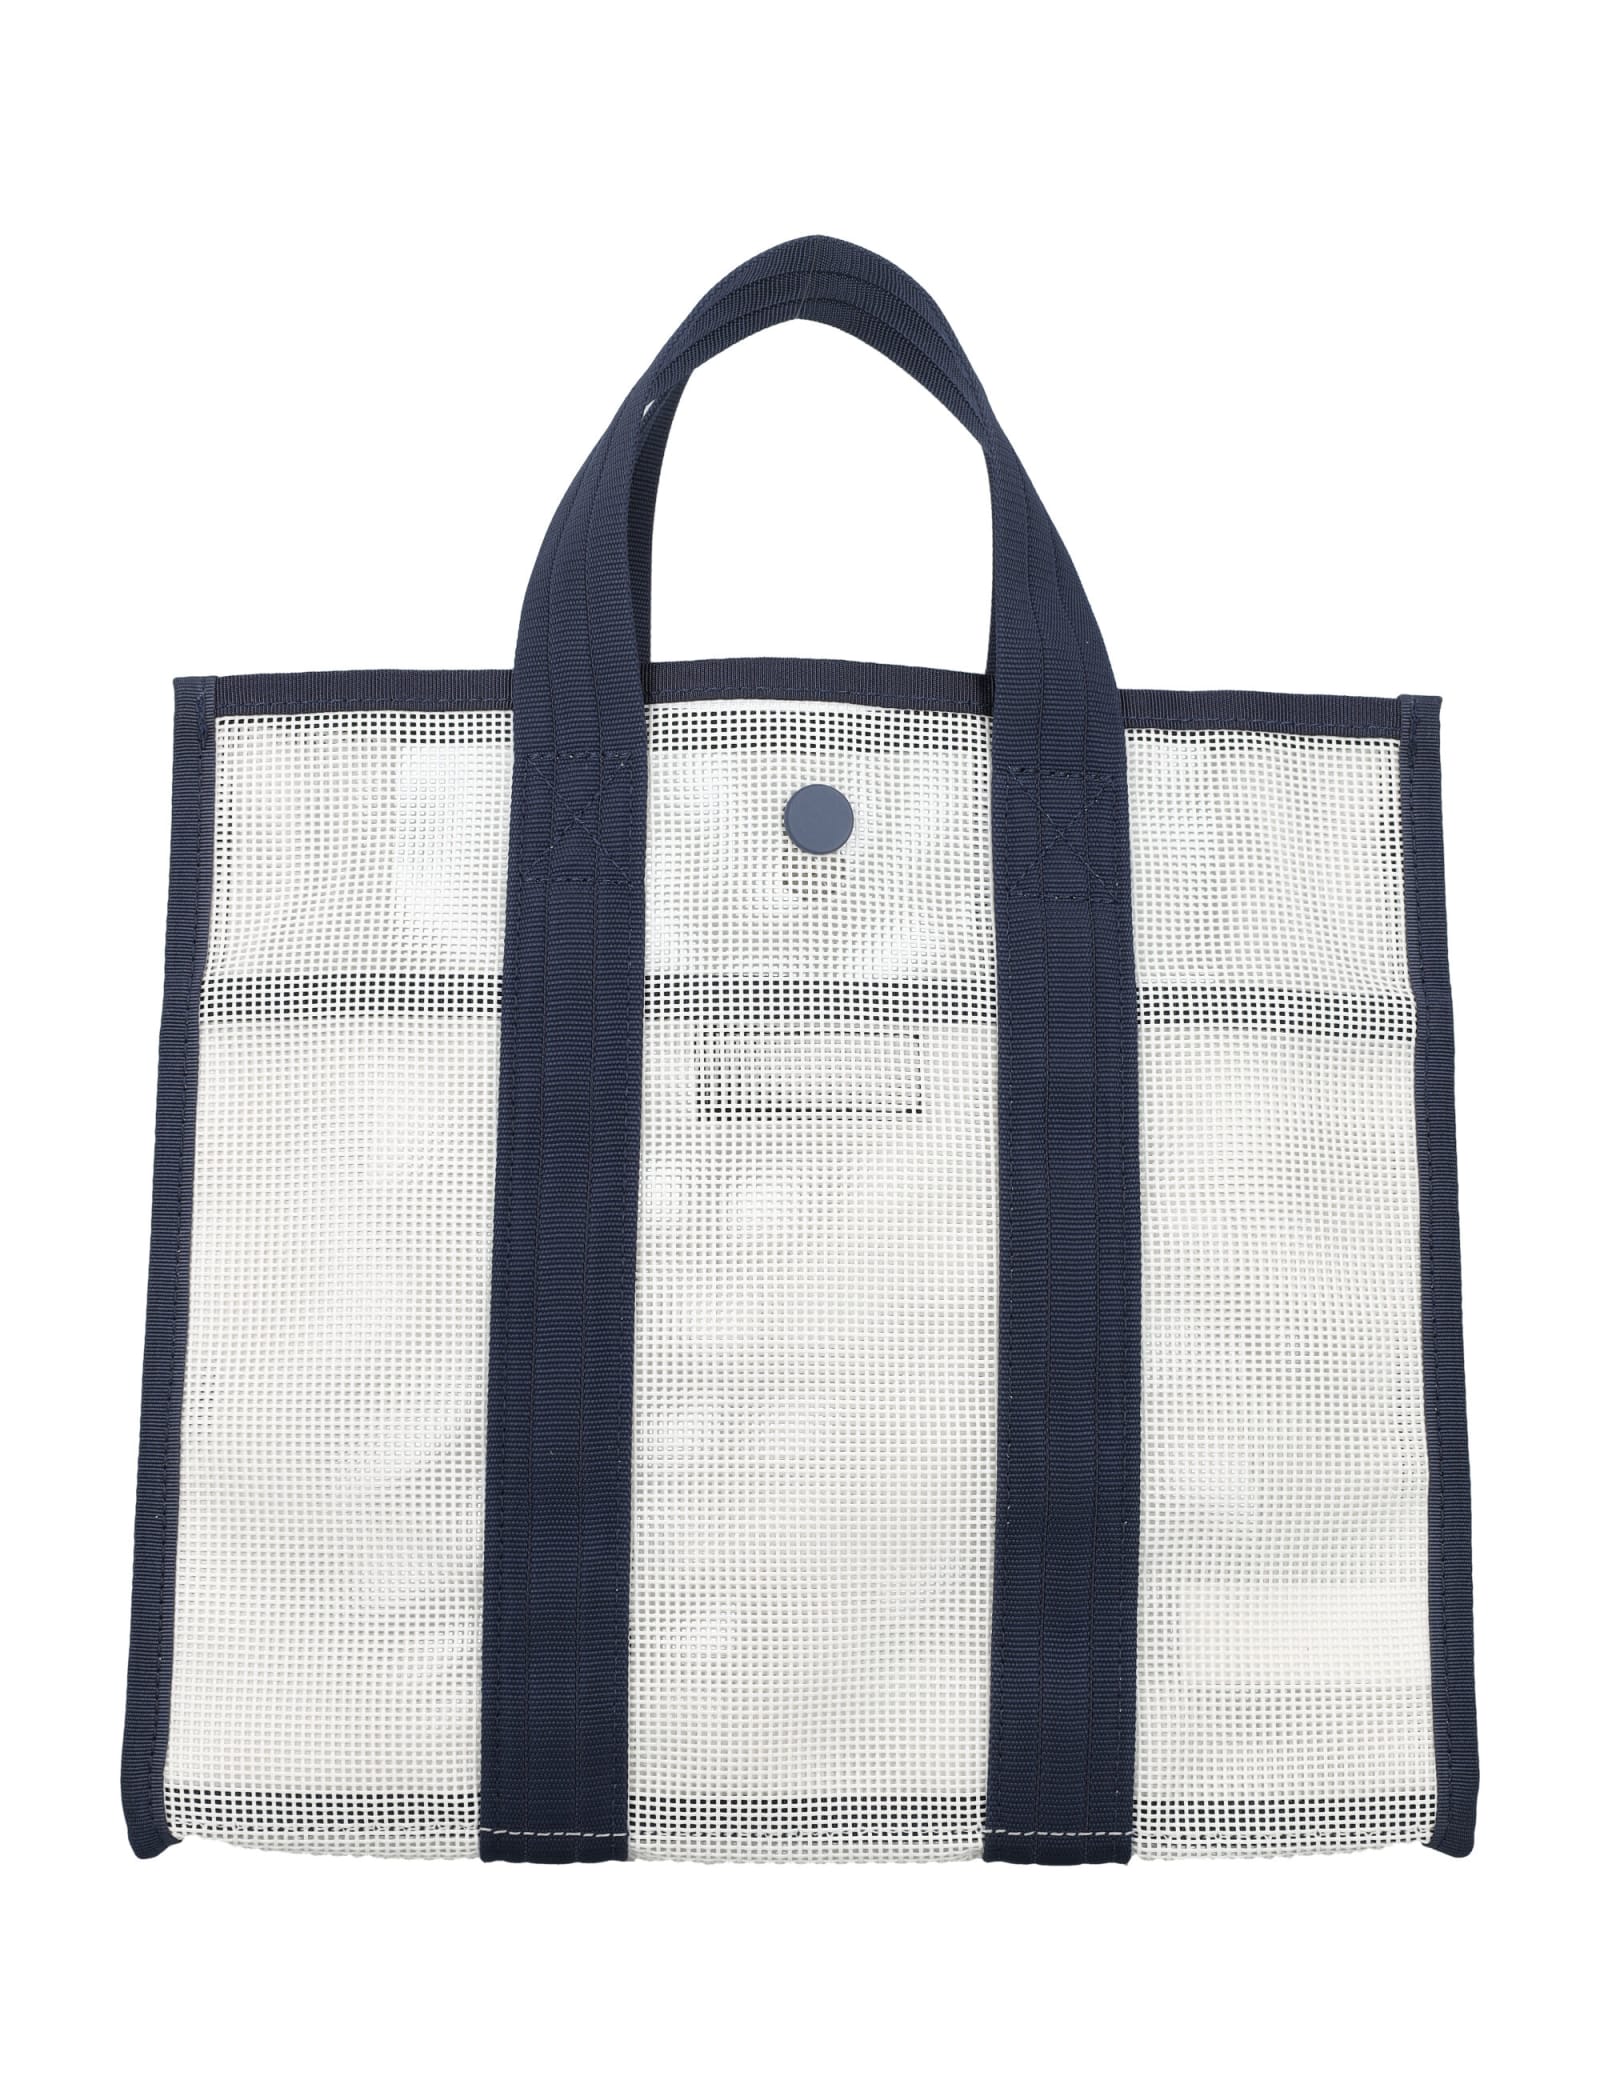 Shop Apc Cabas Louise Tote Bag In White/navy